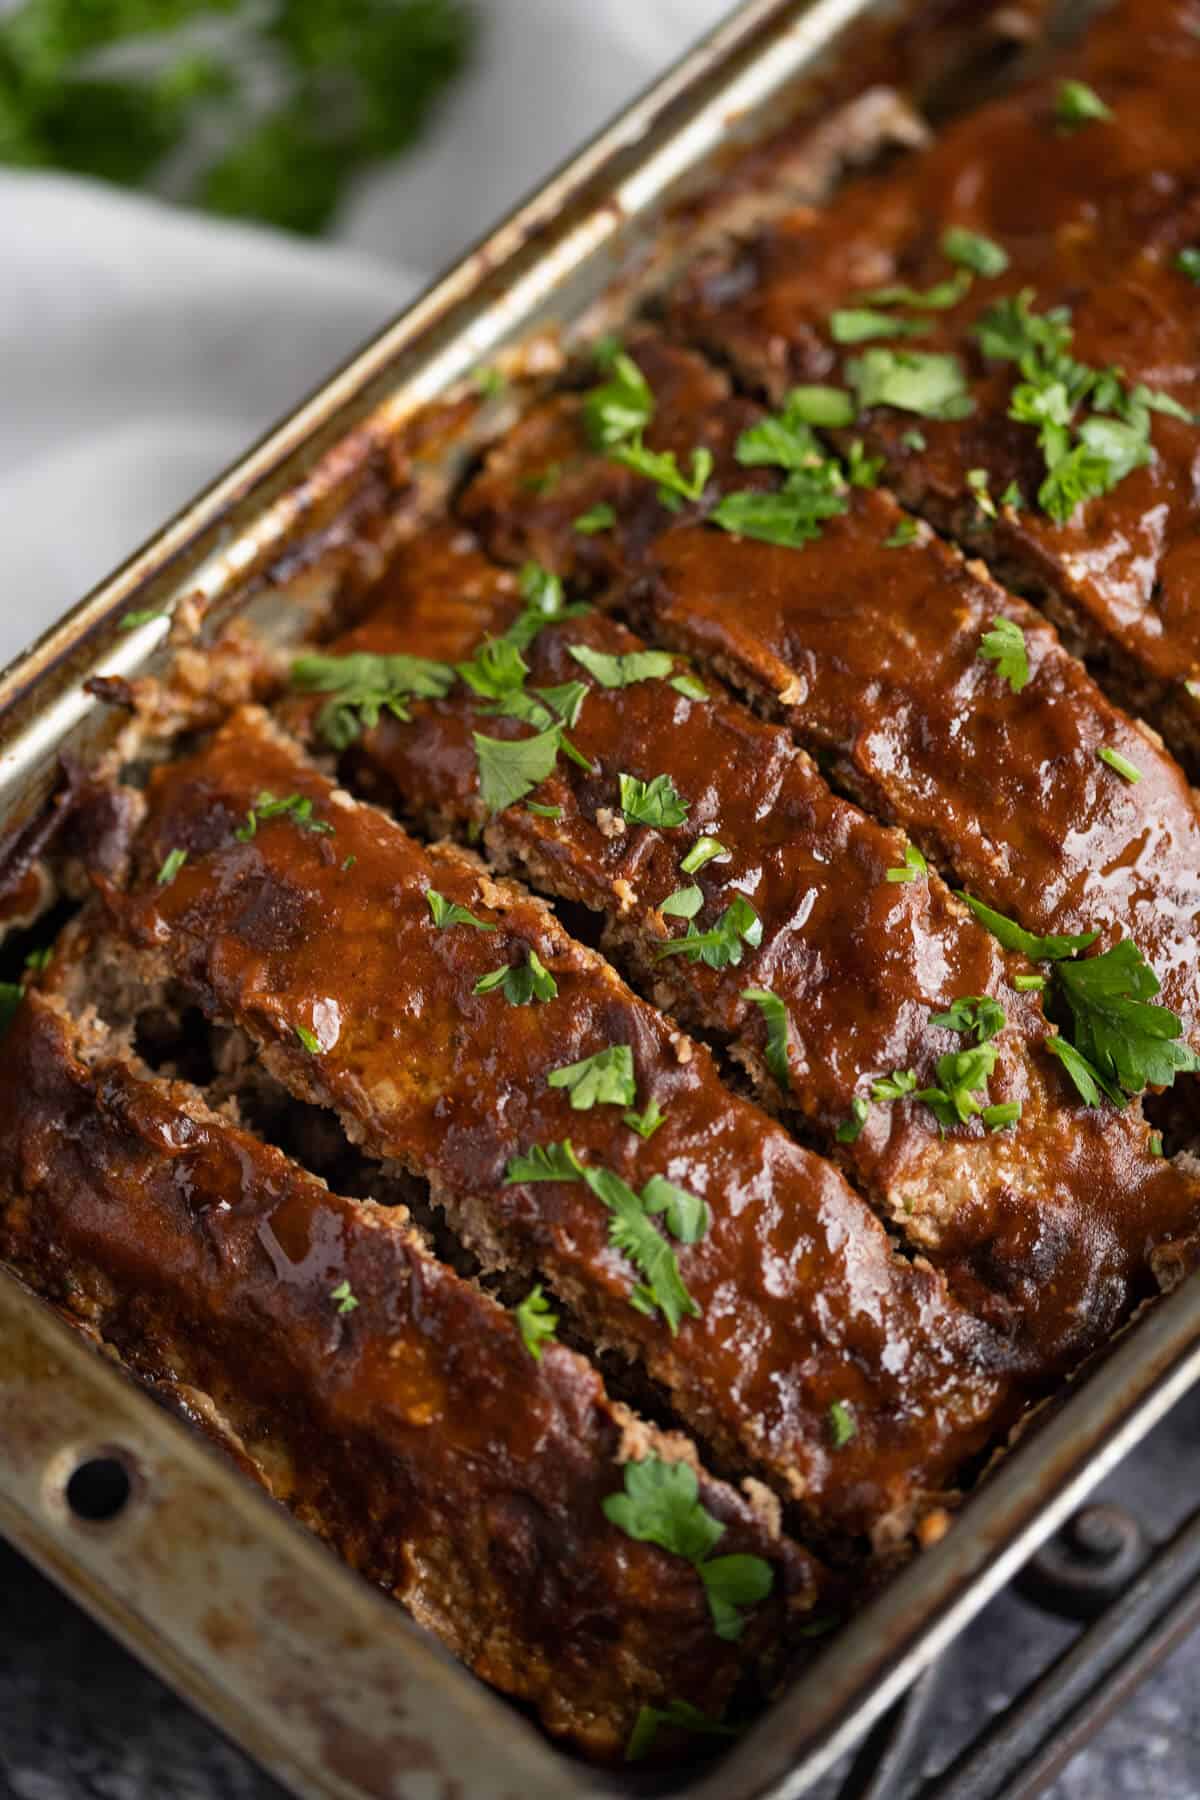 sliced low carb meatloaf in a loaf pan that has been glazed with sauce and garnished with parsley